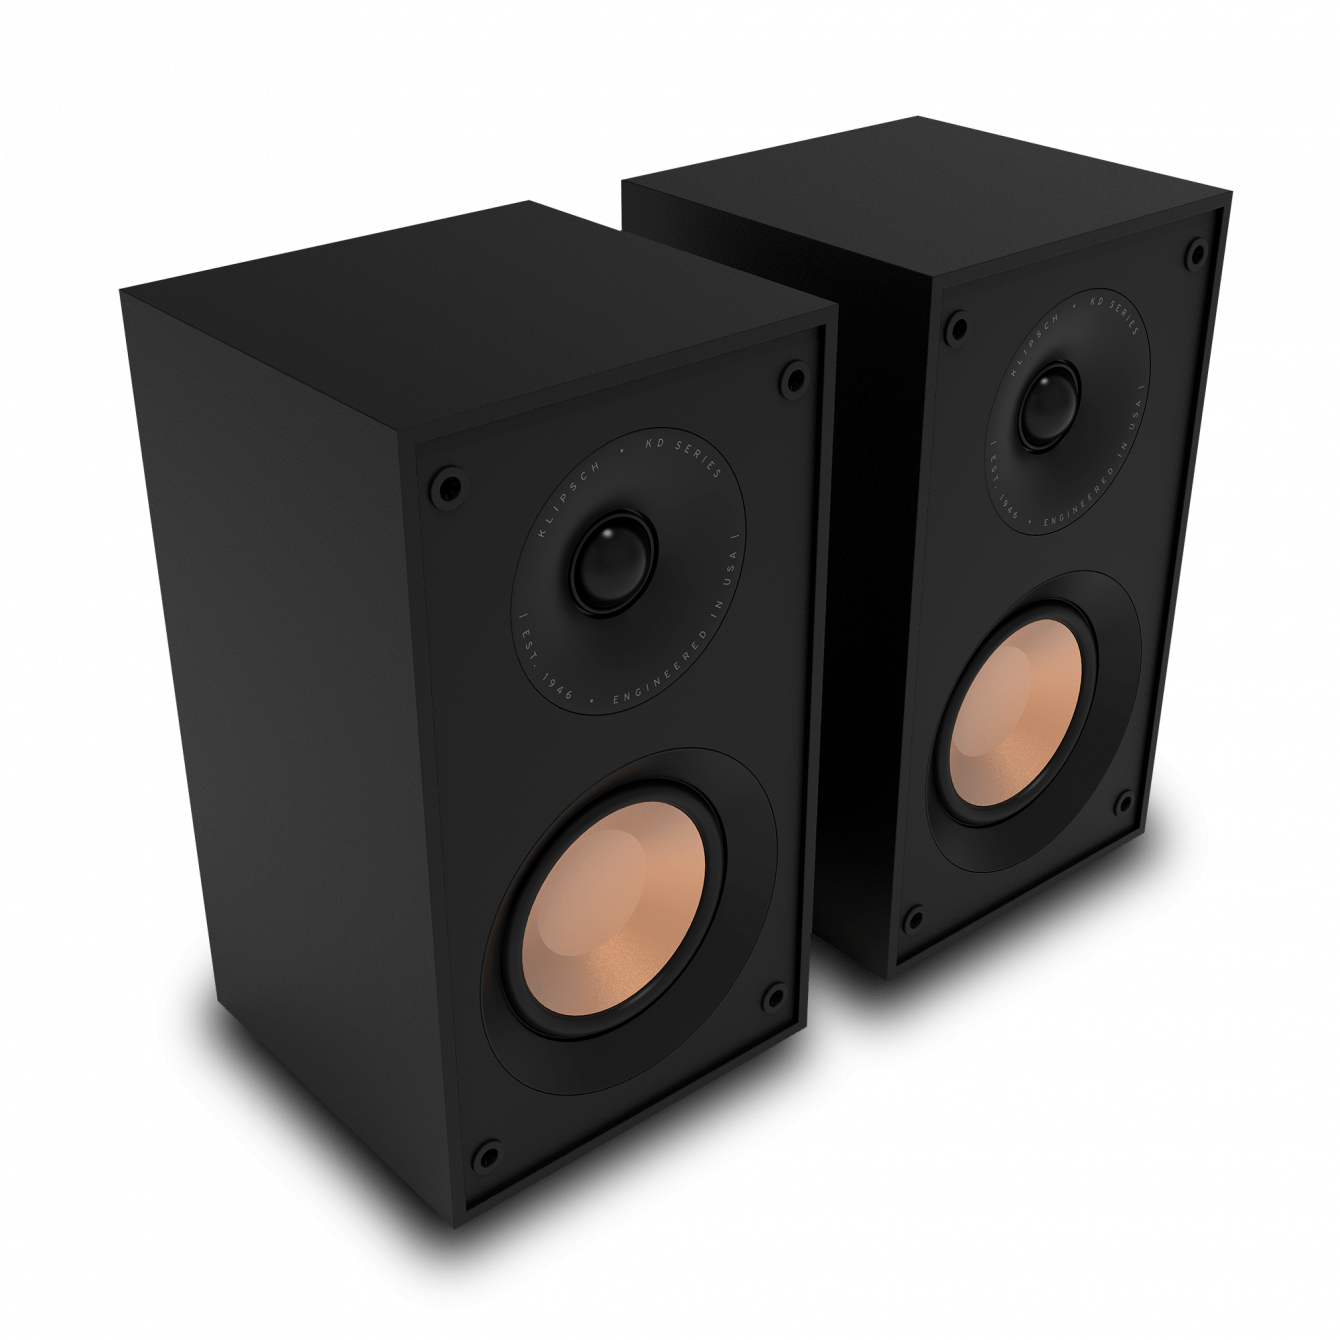 The new Klipsch KD-400 speakers are coming